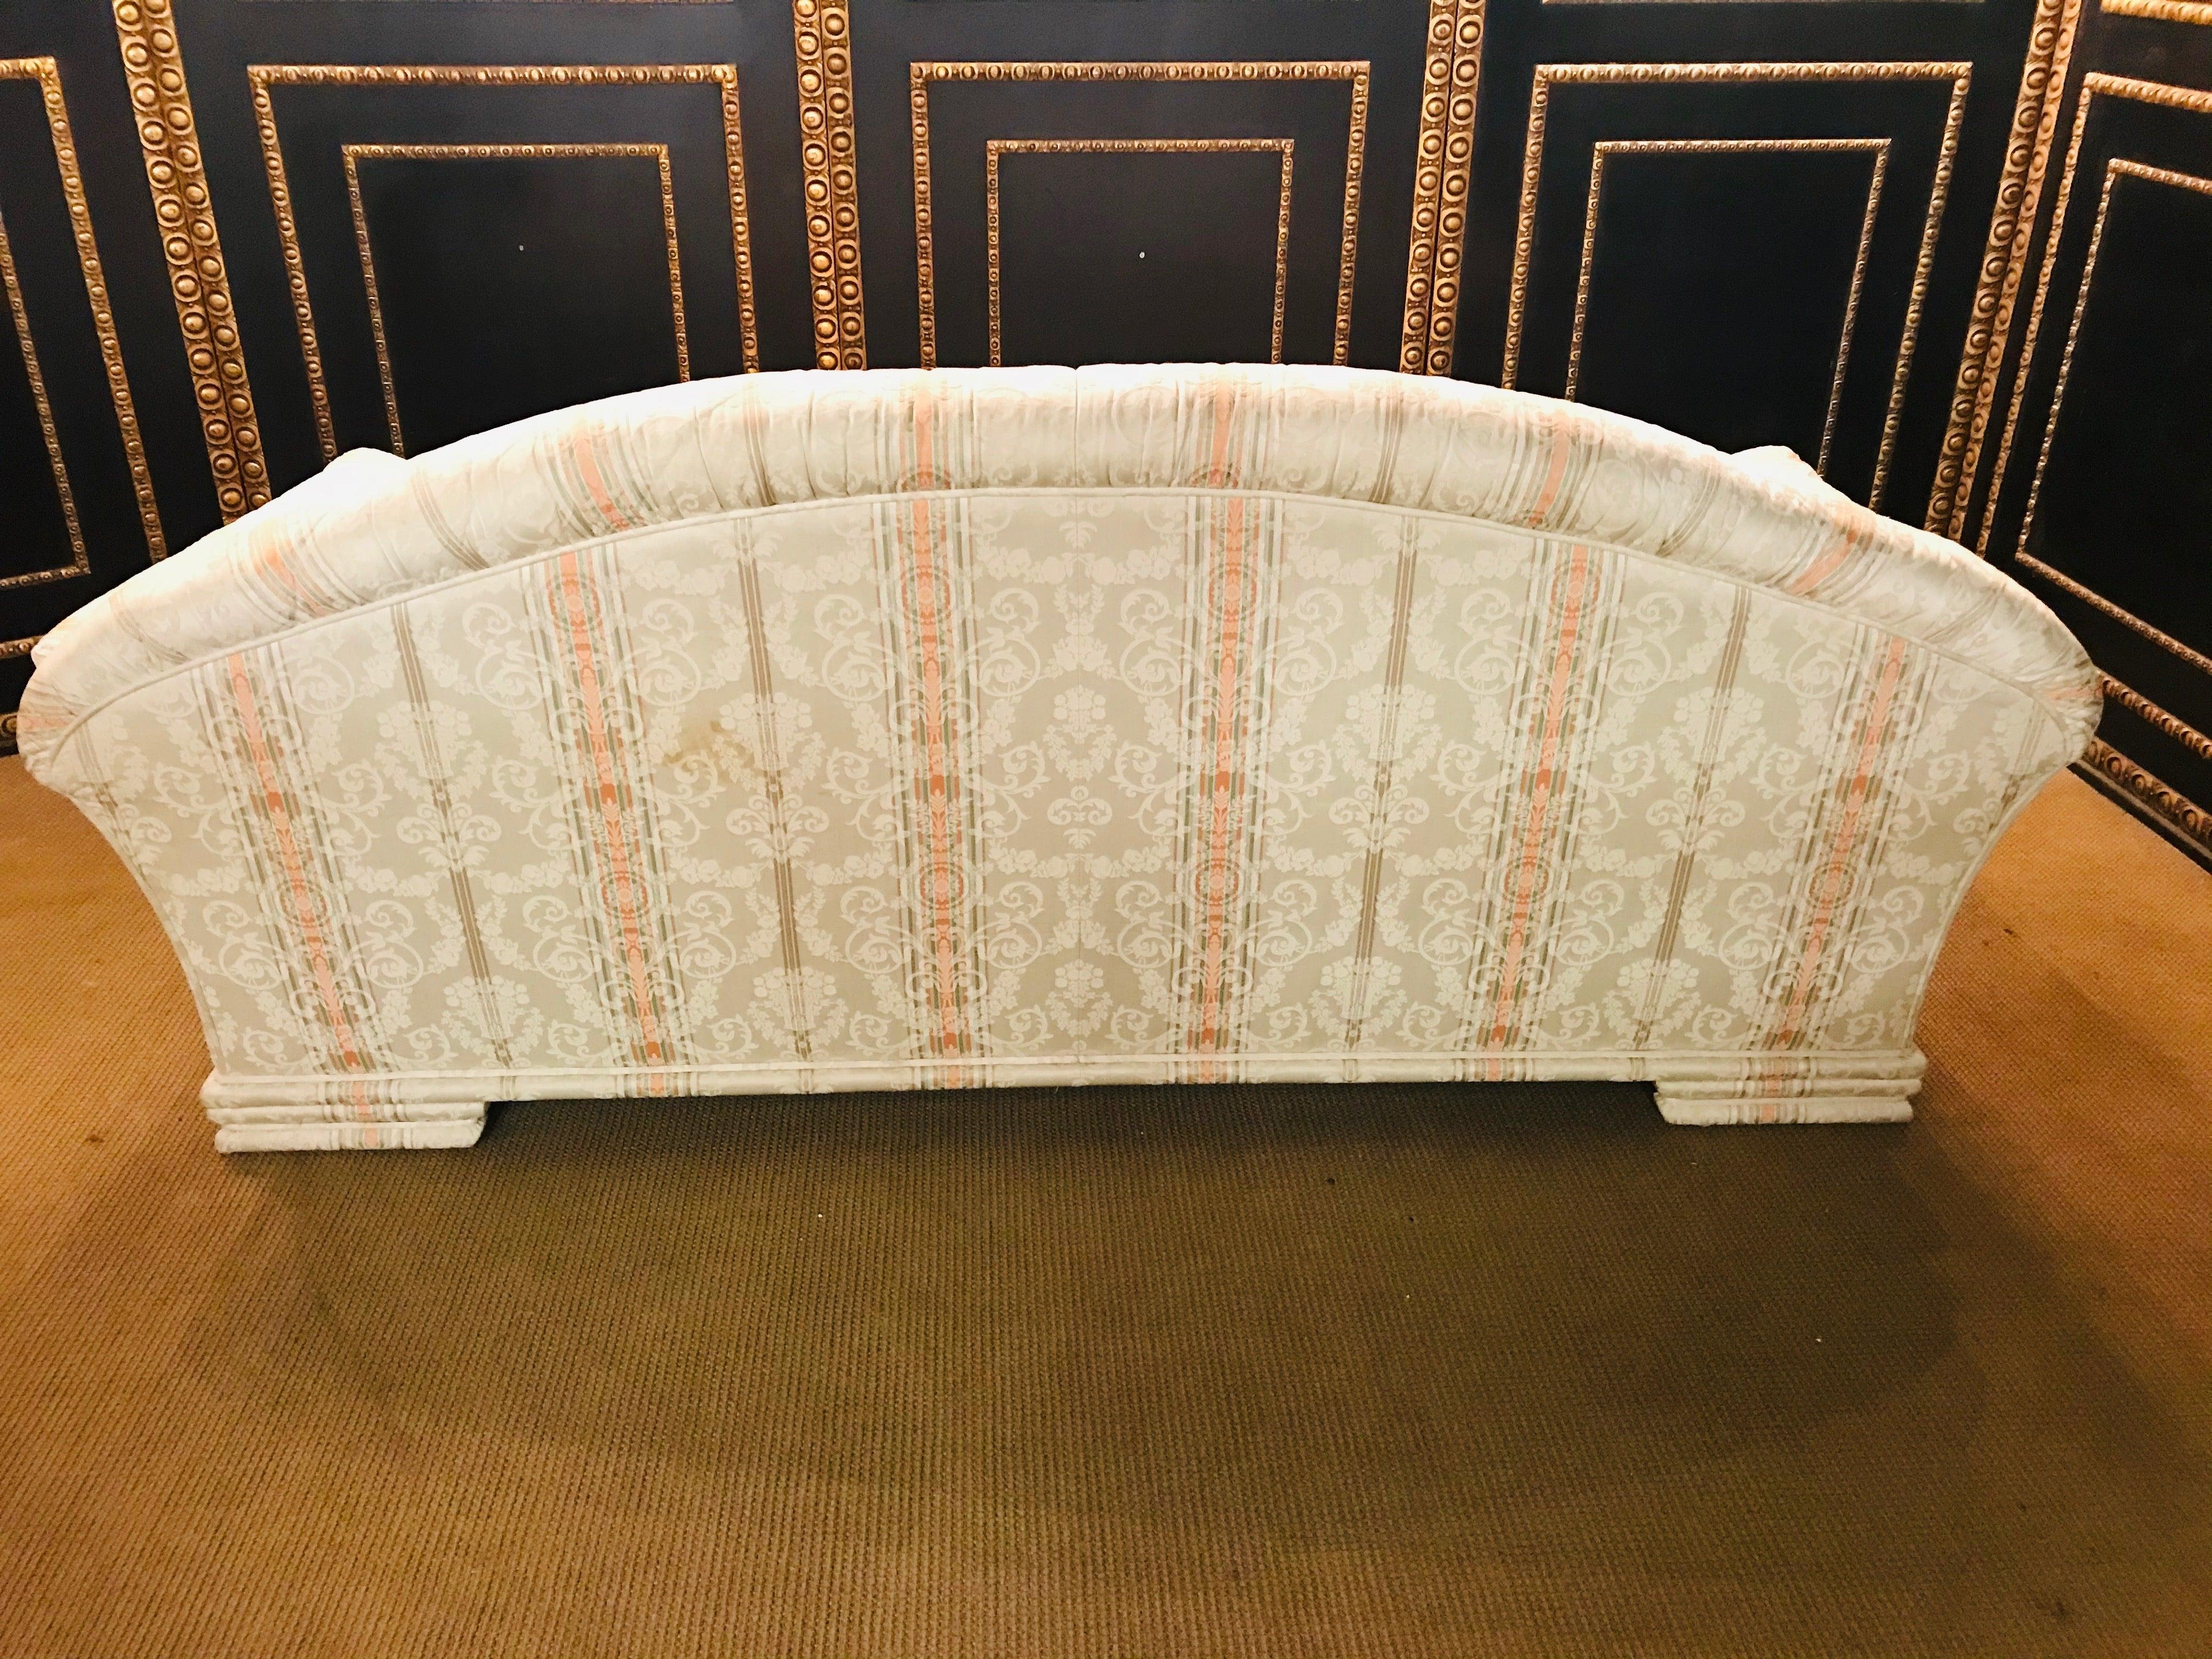 Very High-Quality Couch Set from the Bielefeld Workshops with Baroque Patterns 4